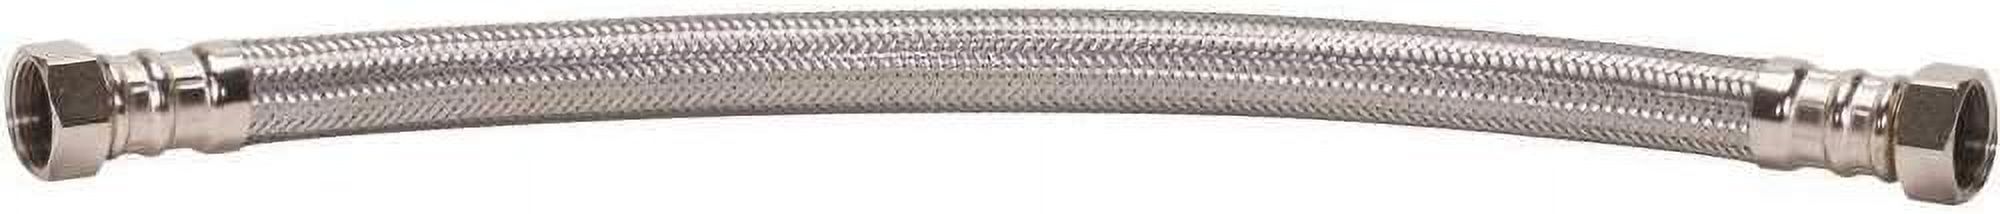 Fluidmaster B1H18 Water Heater Connector, Braided Stainless Steel - 3/4 Female Iron Pipe x 3/4 Female Iron Pipe, 18-Inch Length - image 4 of 7